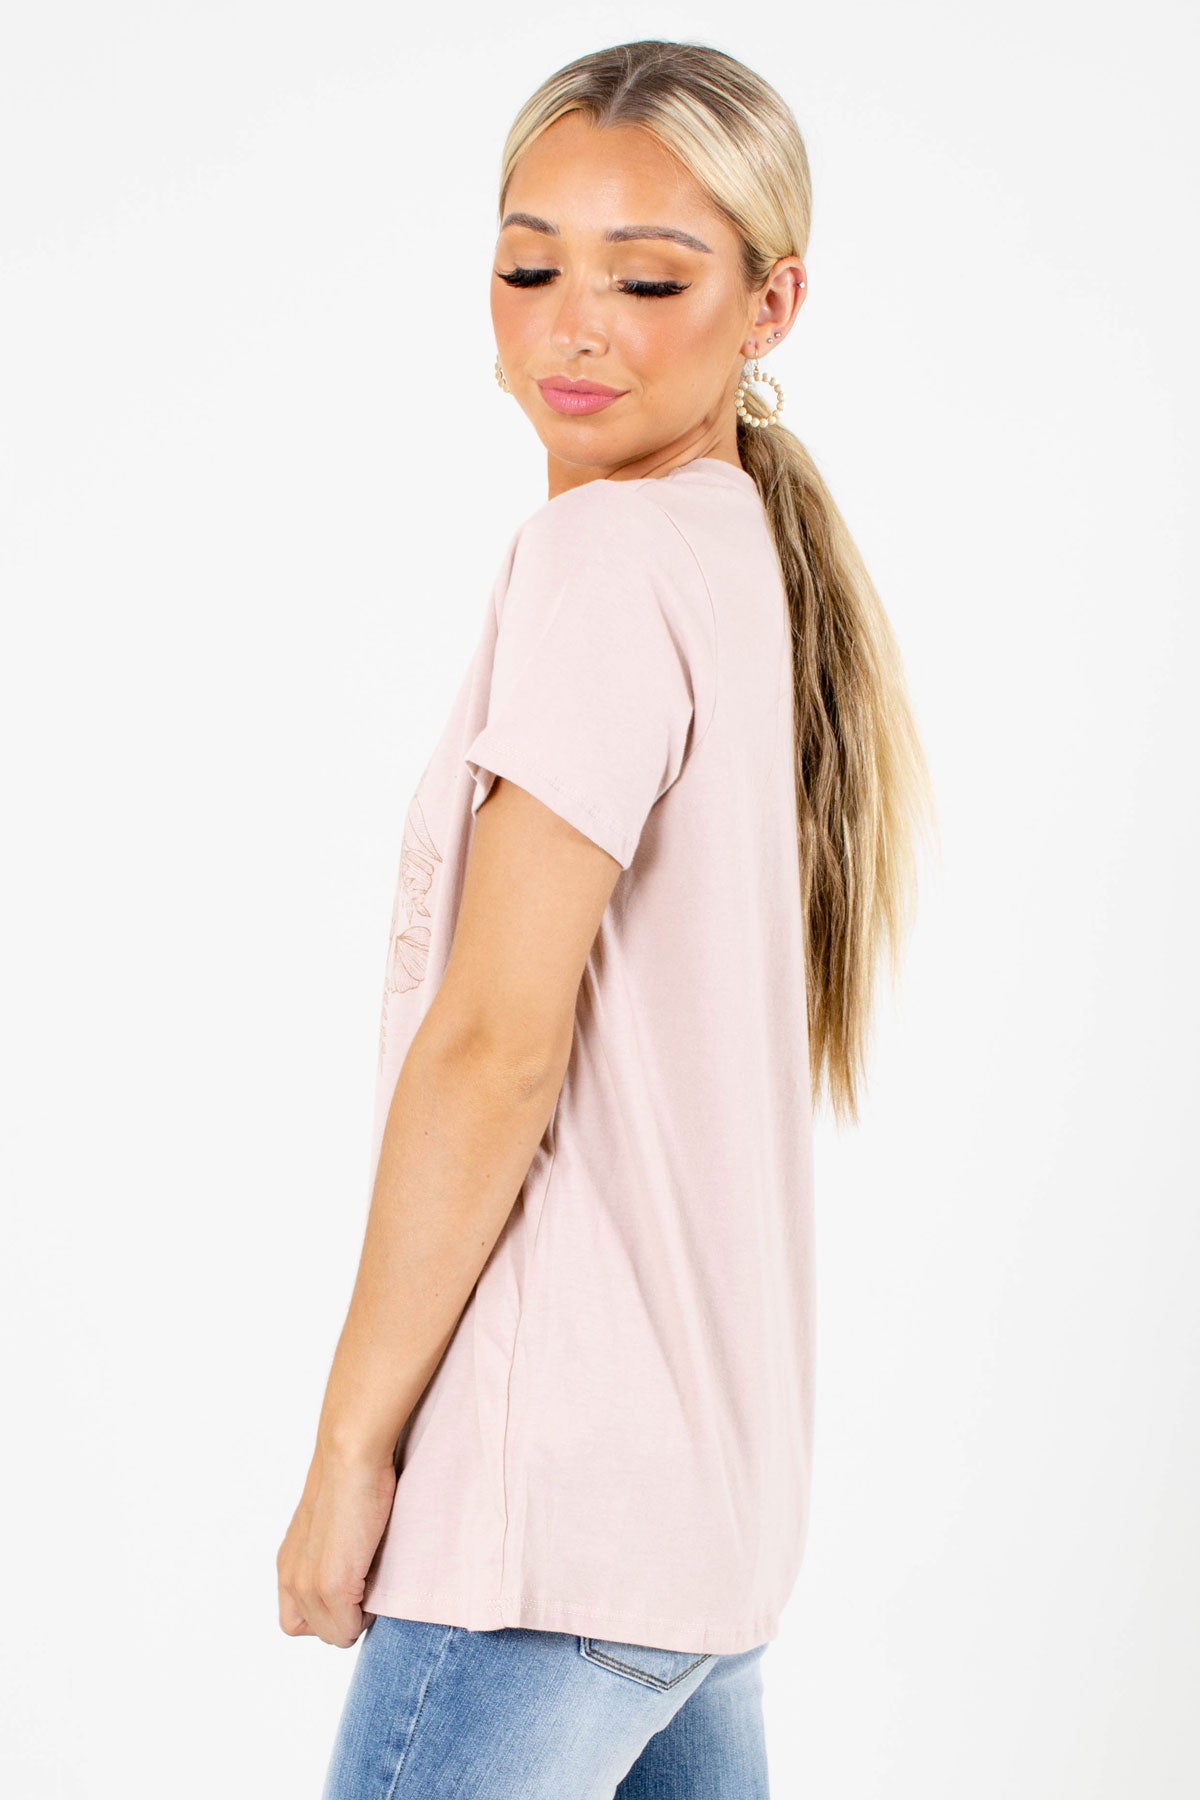 Pink Casual Everyday Boutique Graphic T-Shirts for Women